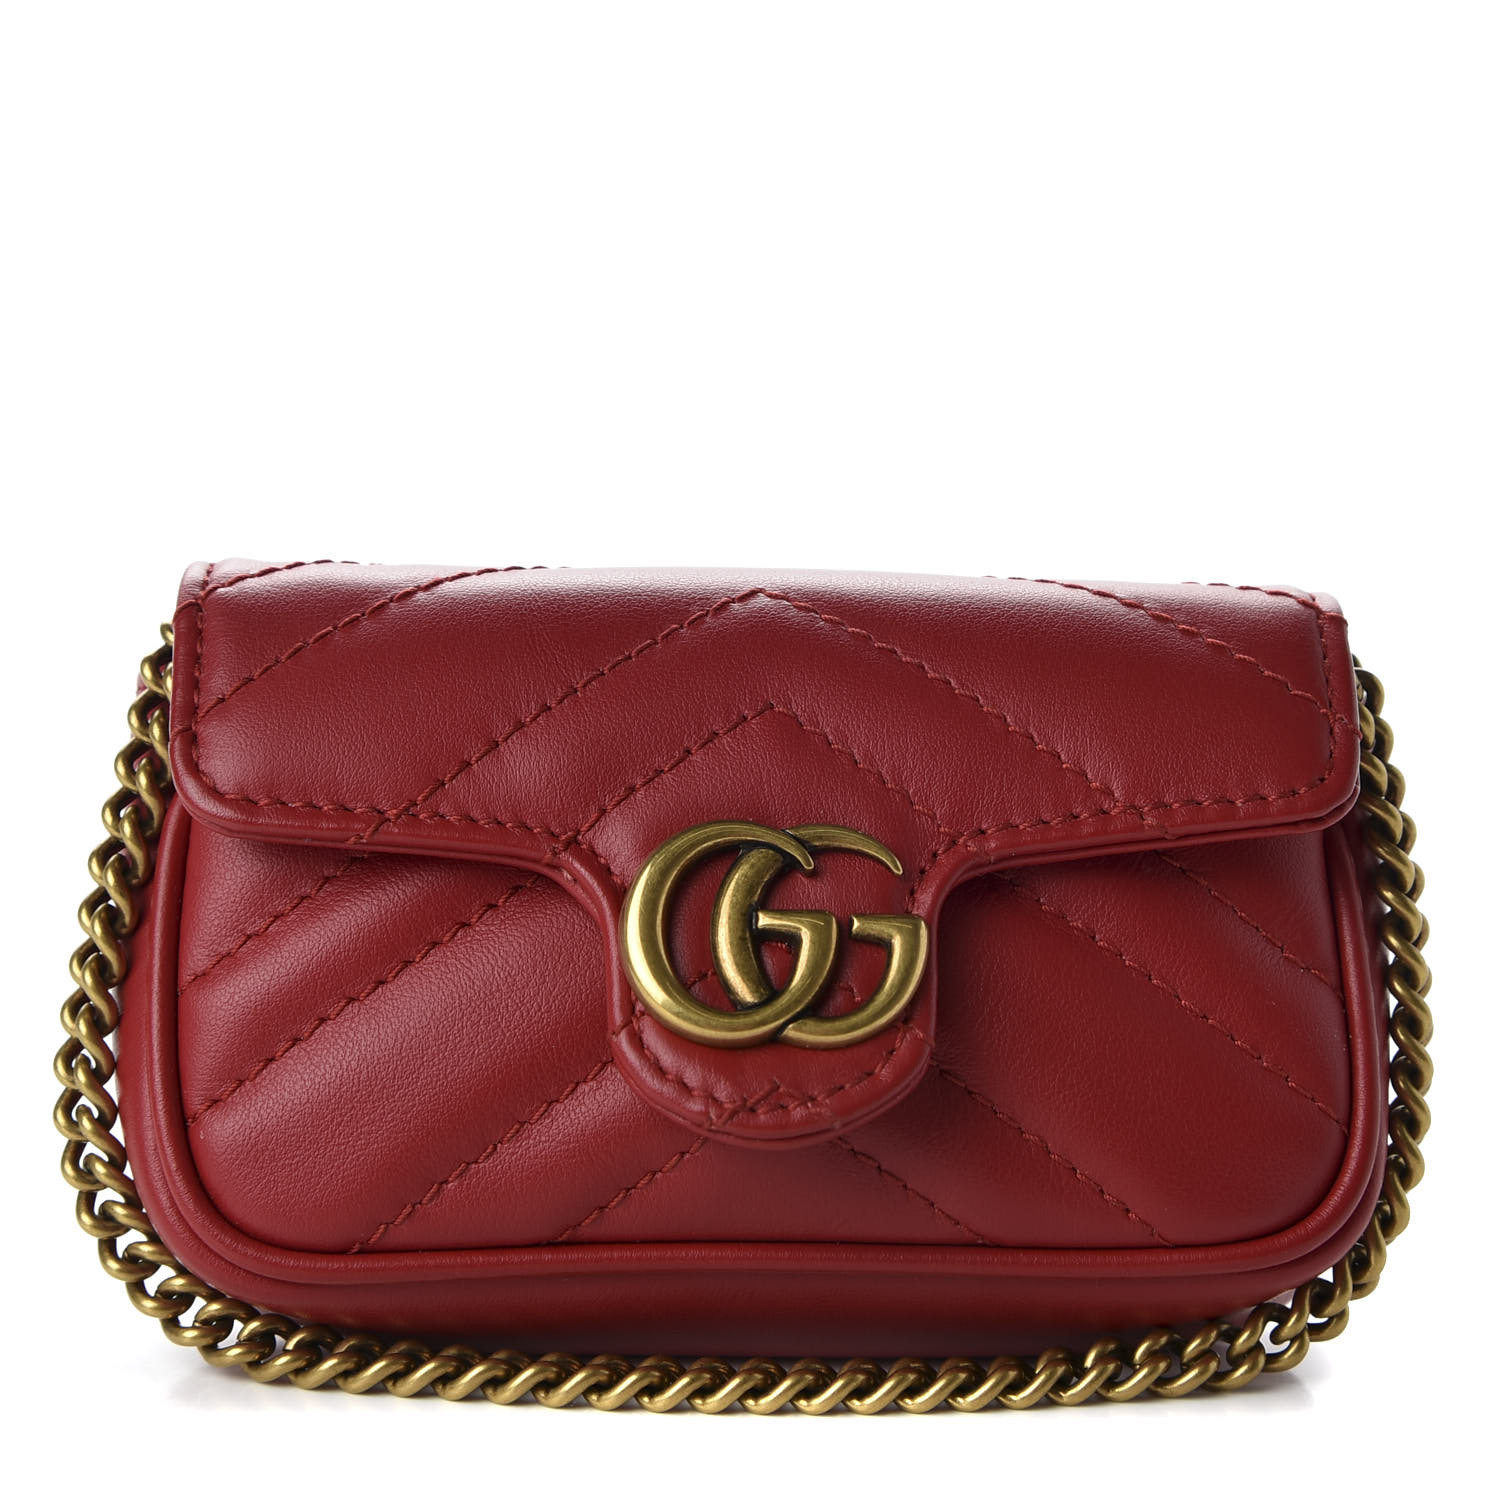 purse with gg